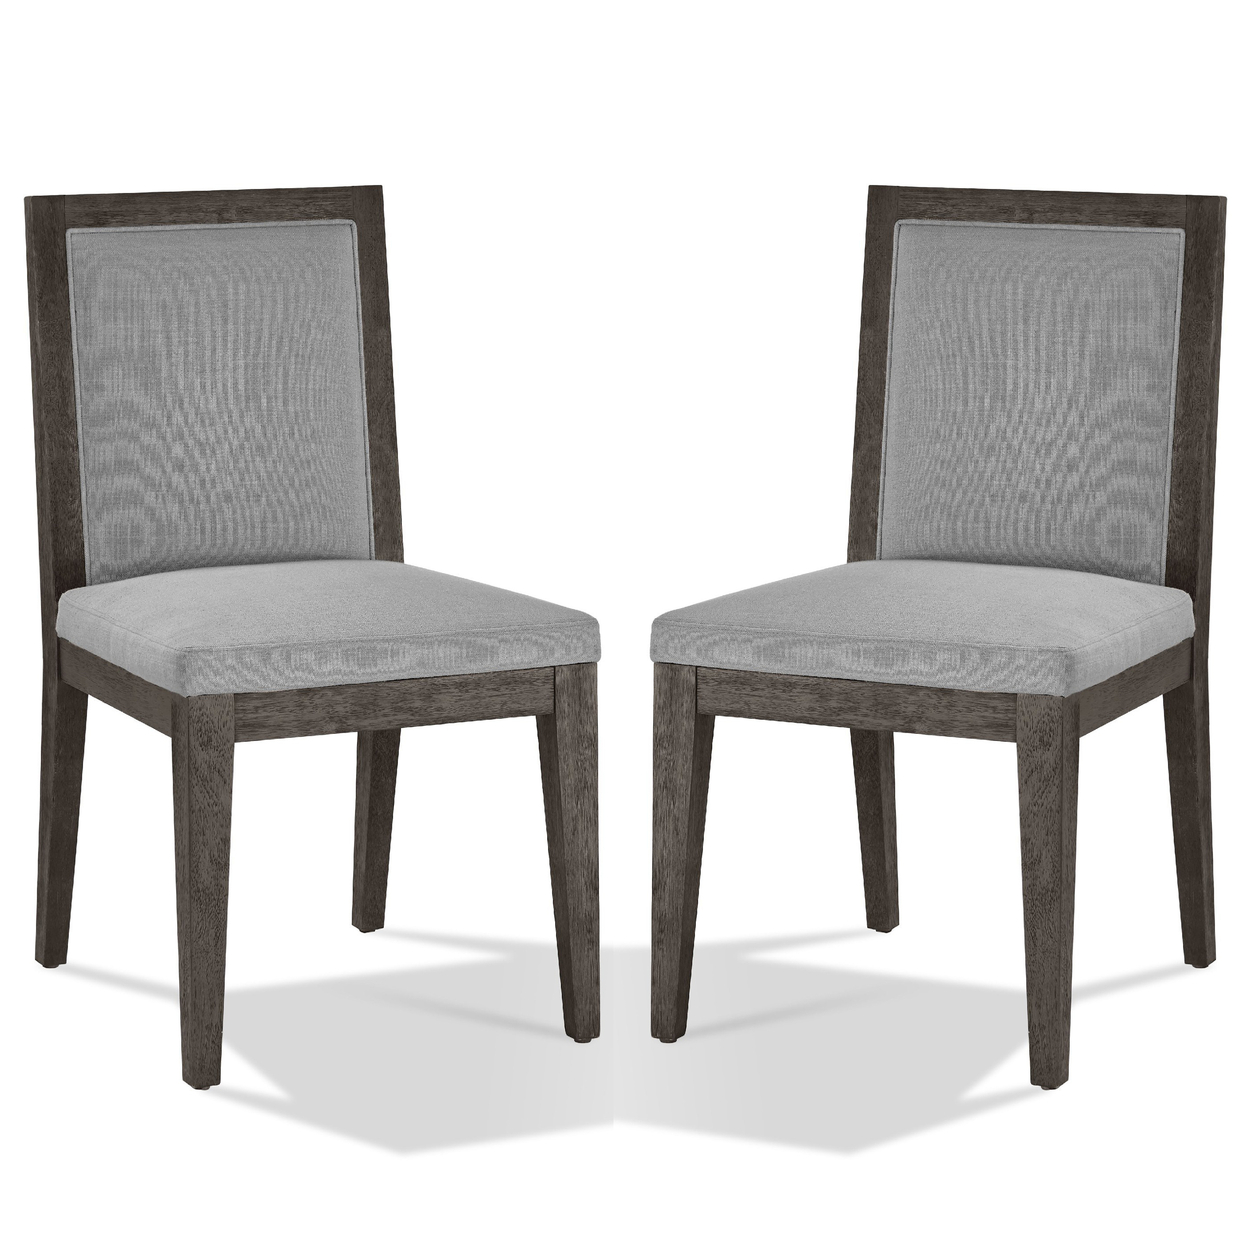 Mod 19 Inch Dining Chair,Solid Wood, Upholstered, Set Of 2, Ash Gray- Saltoro Sherpi